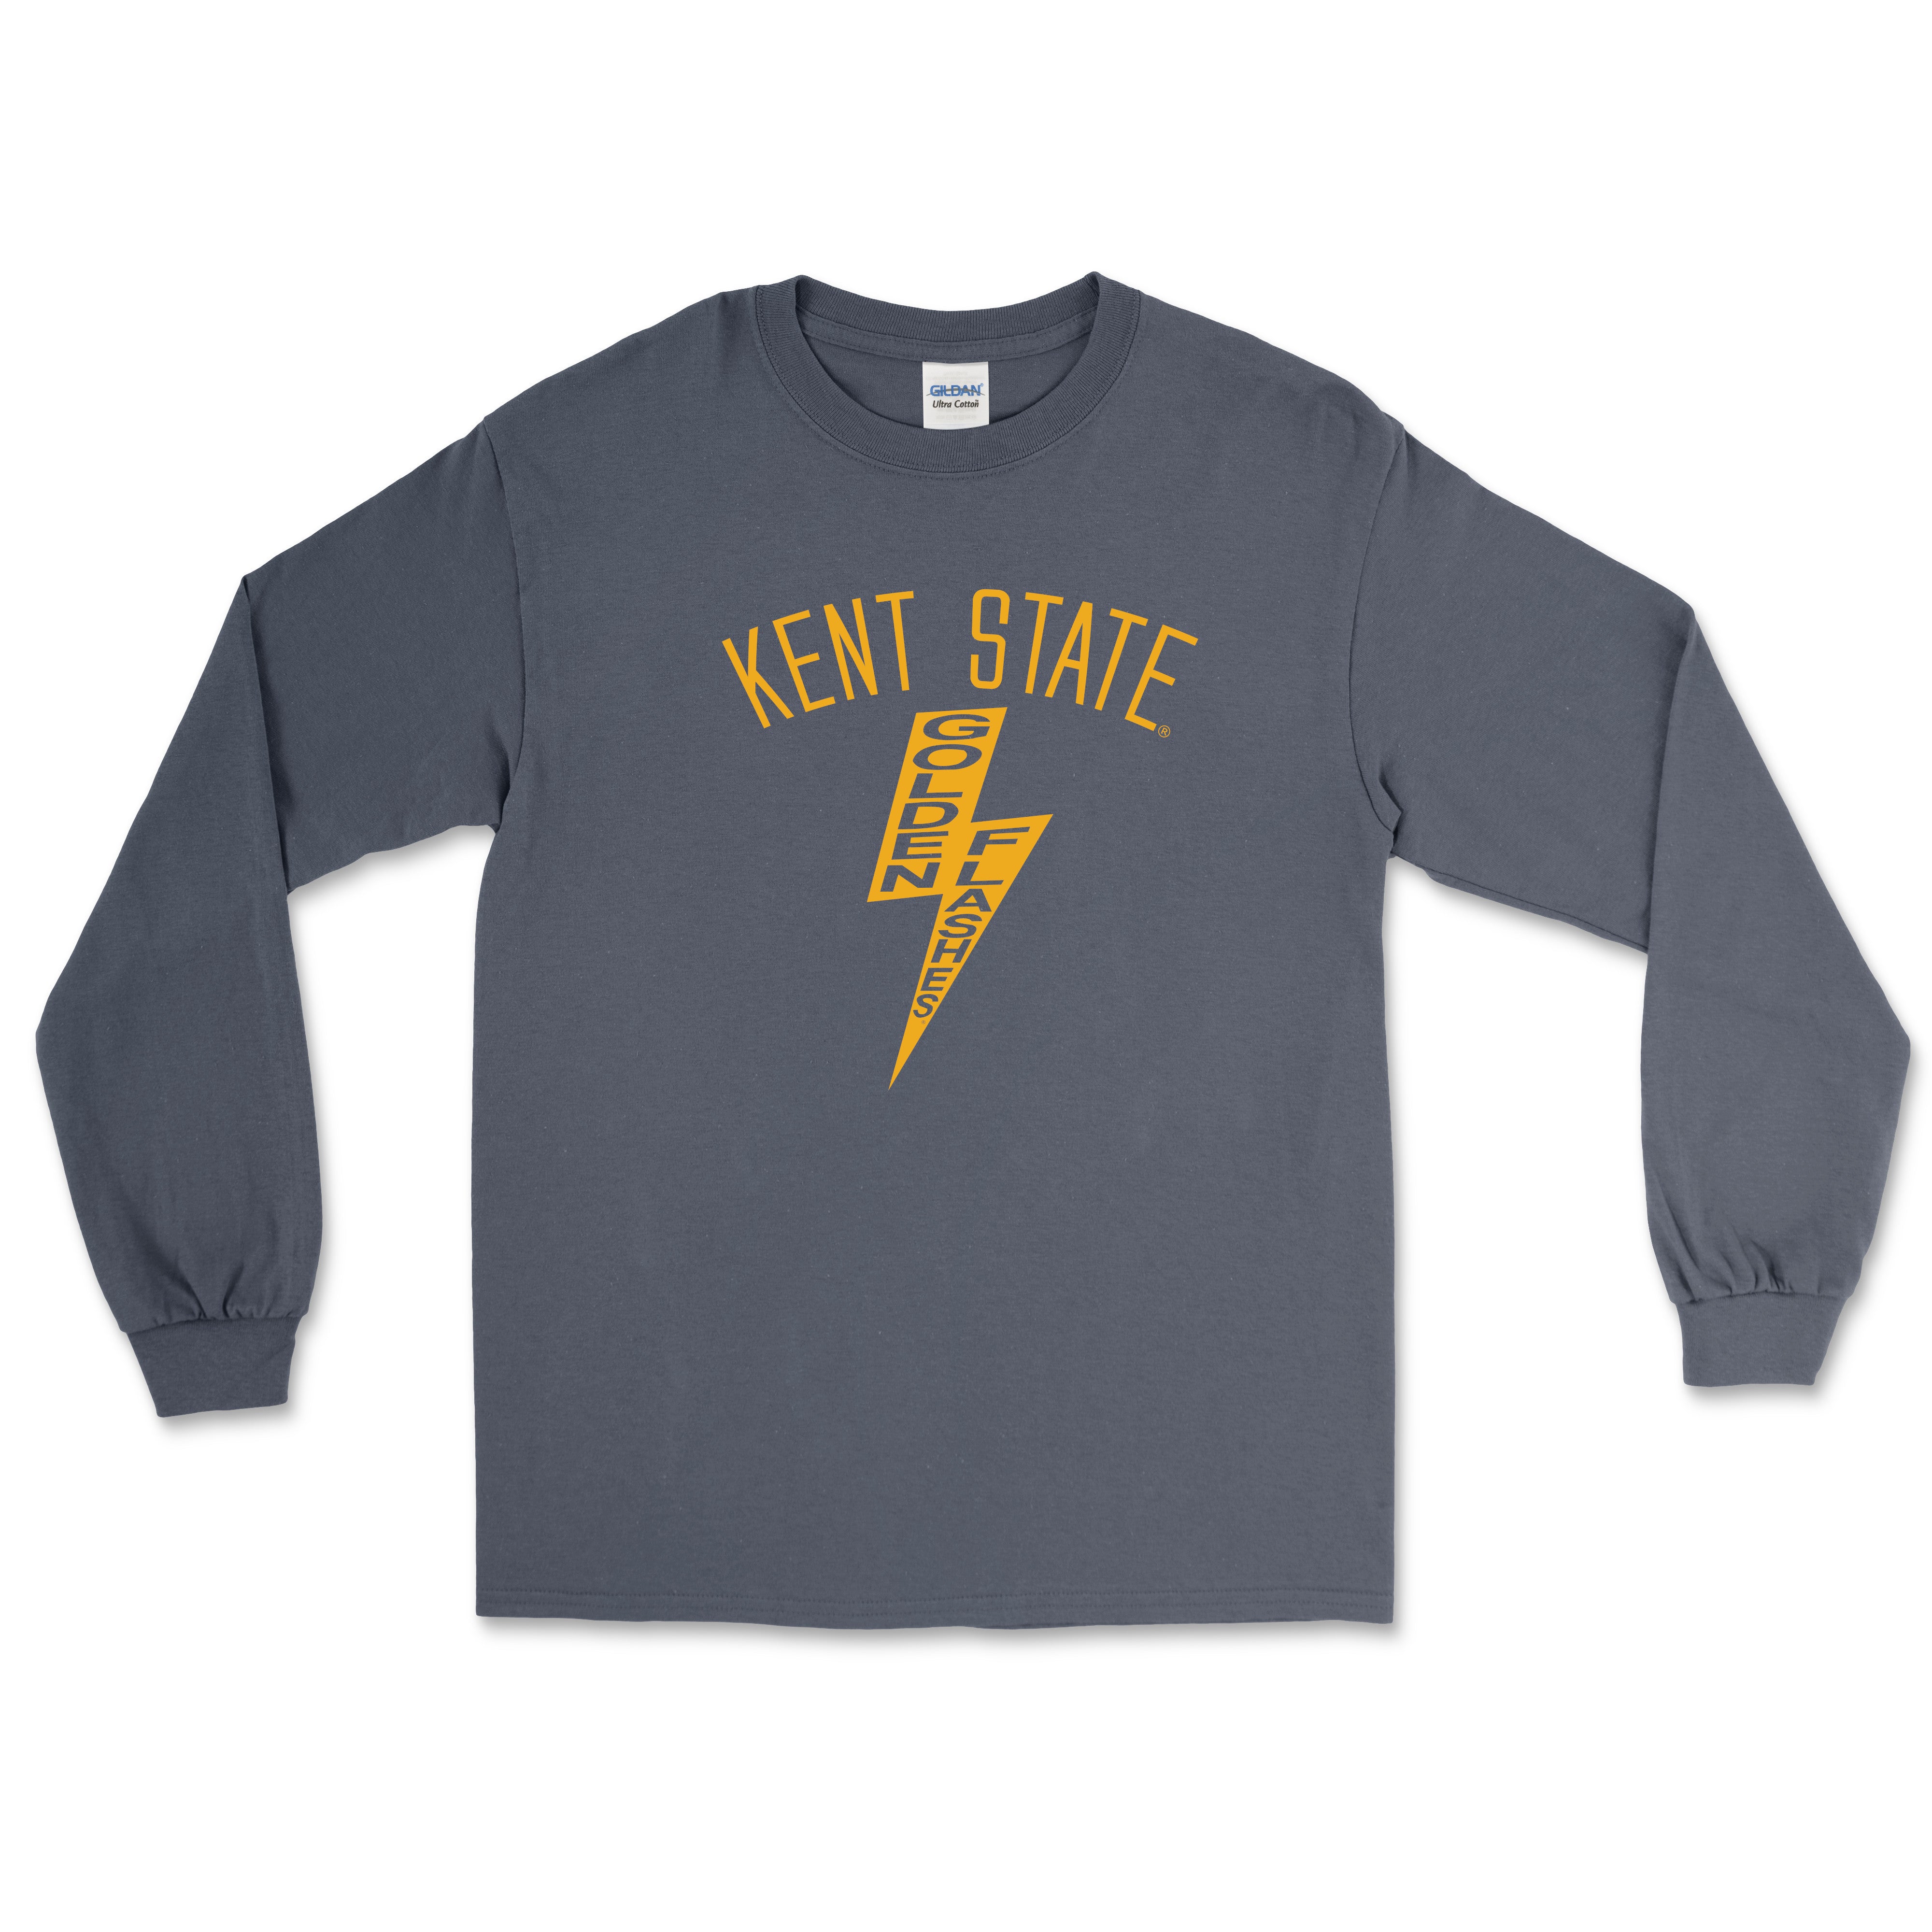 Kent State In Bolt